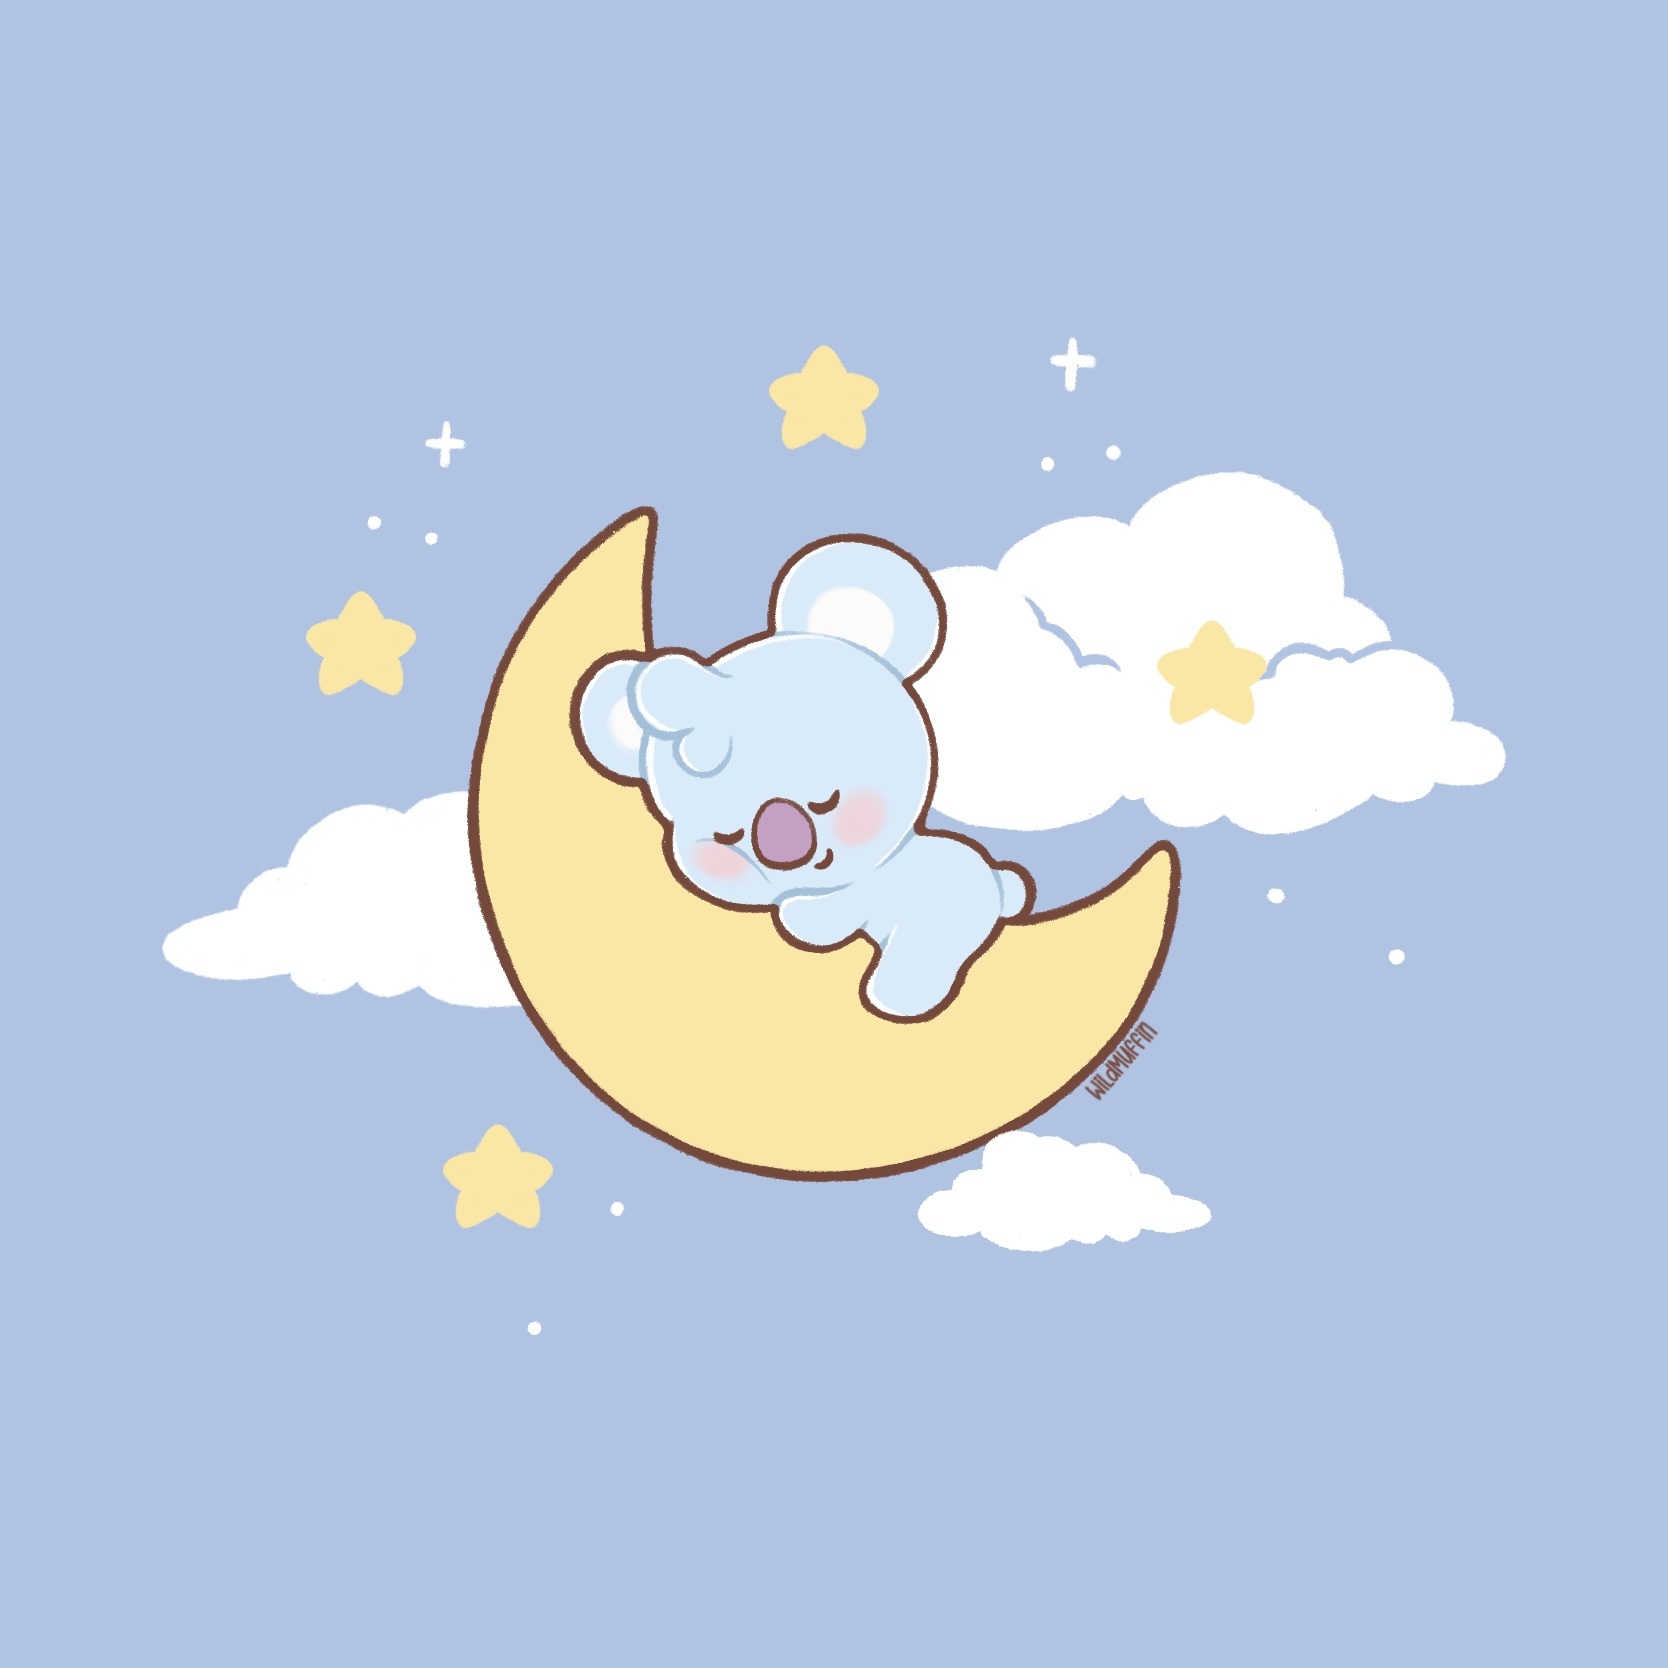 KOYA BT21 wallpaper - WildMuffin's Ko-fi Shop - Ko-fi ❤️ Where creators get  support from fans through donations, memberships, shop sales and more! The  original 'Buy Me a Coffee' Page.